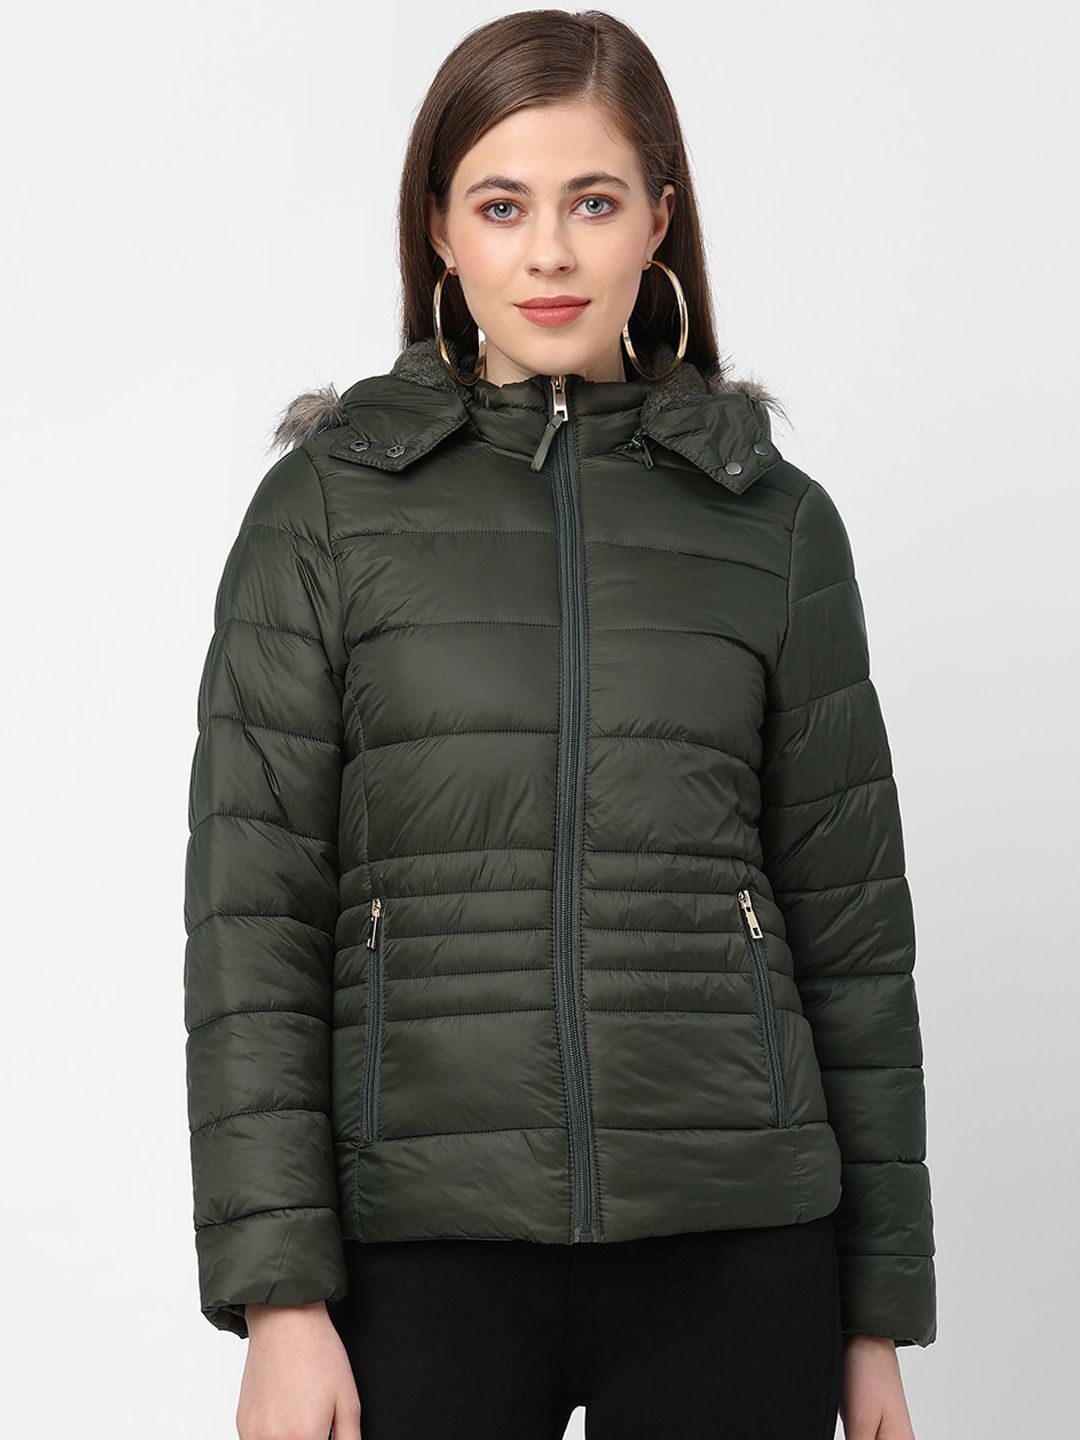 Kraus Jeans Women Olive Green Padded Jacket Price in India